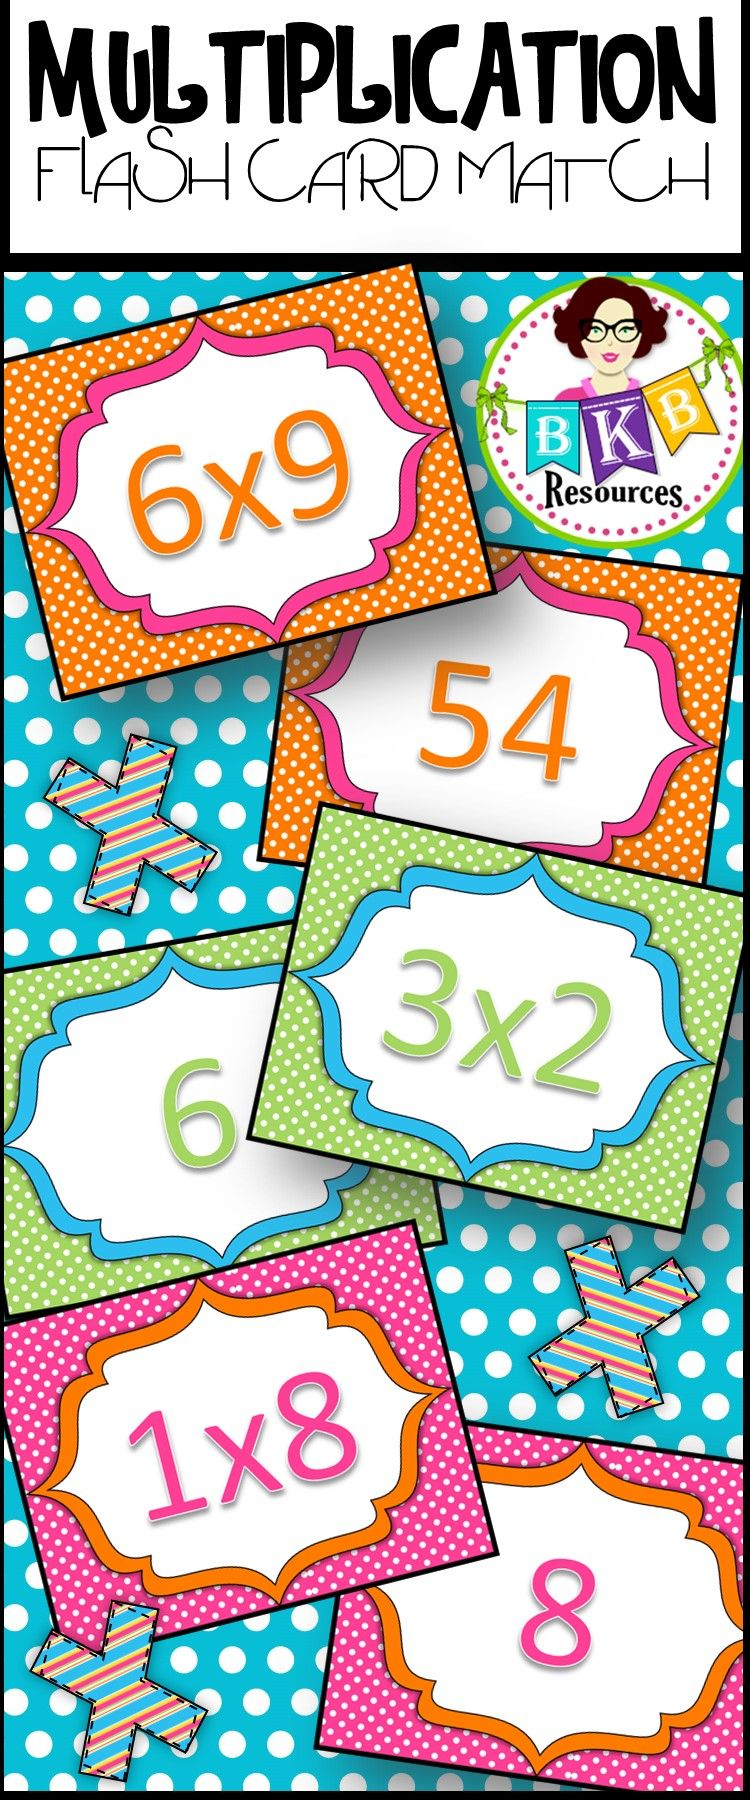 Multiplication Flash Card Match | Multiplication, Learning with regard to Printable 1-12 Multiplication Flash Cards